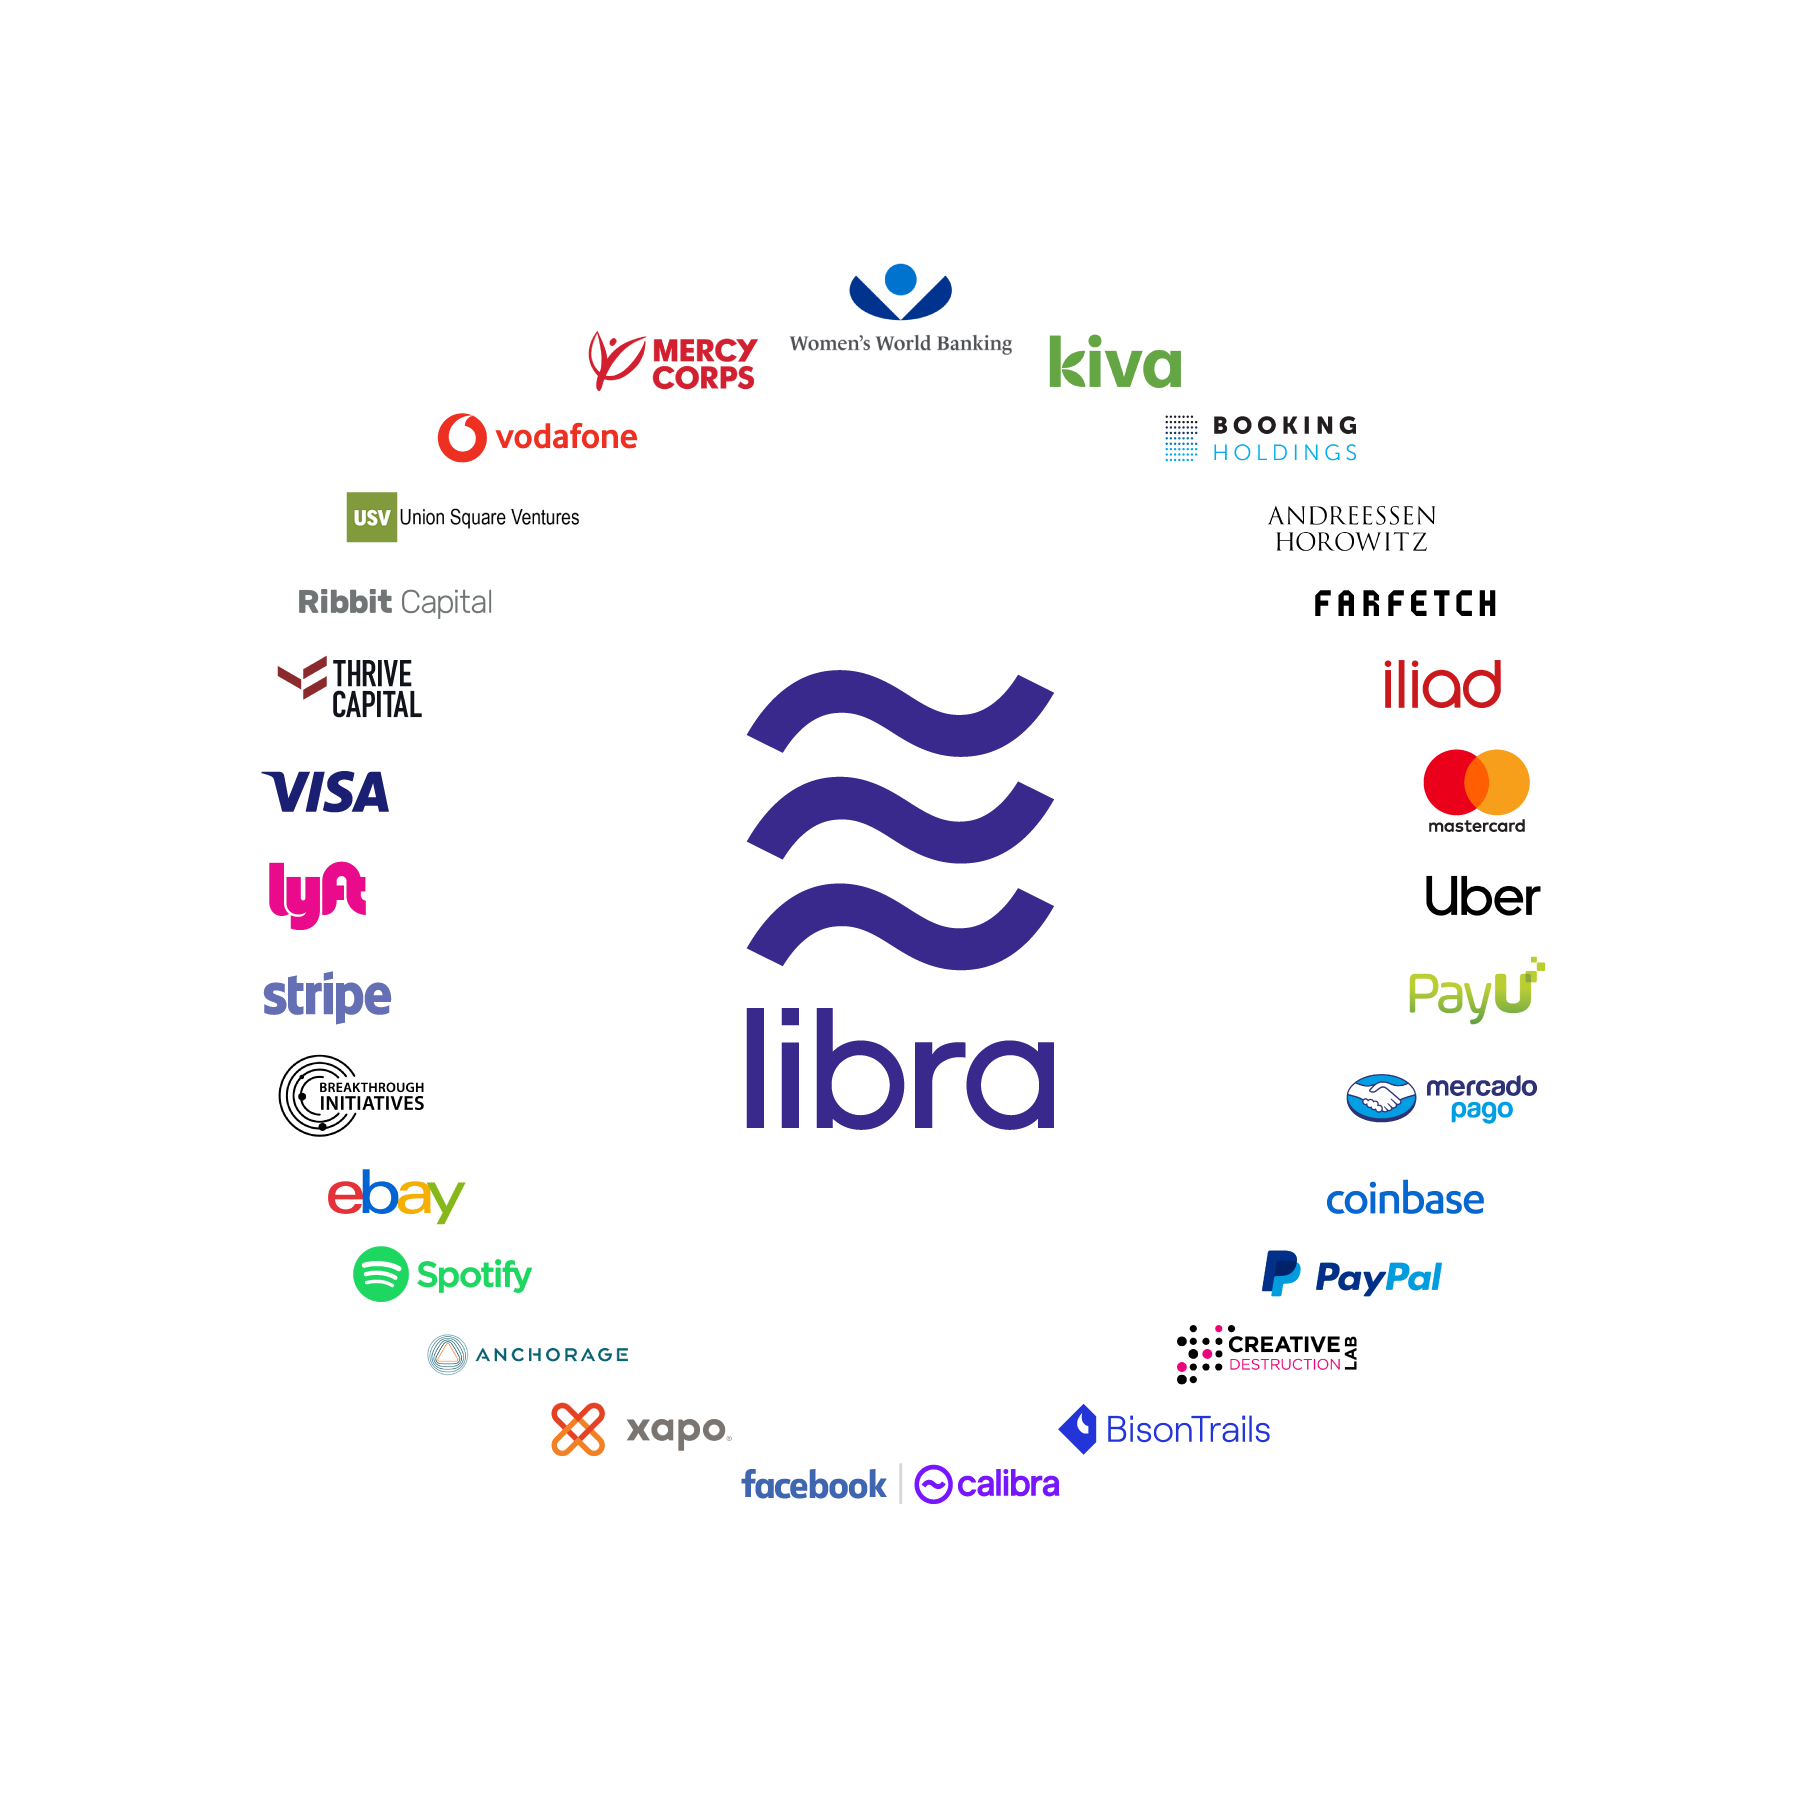 Facebook reveals its Libra cryptocurrency